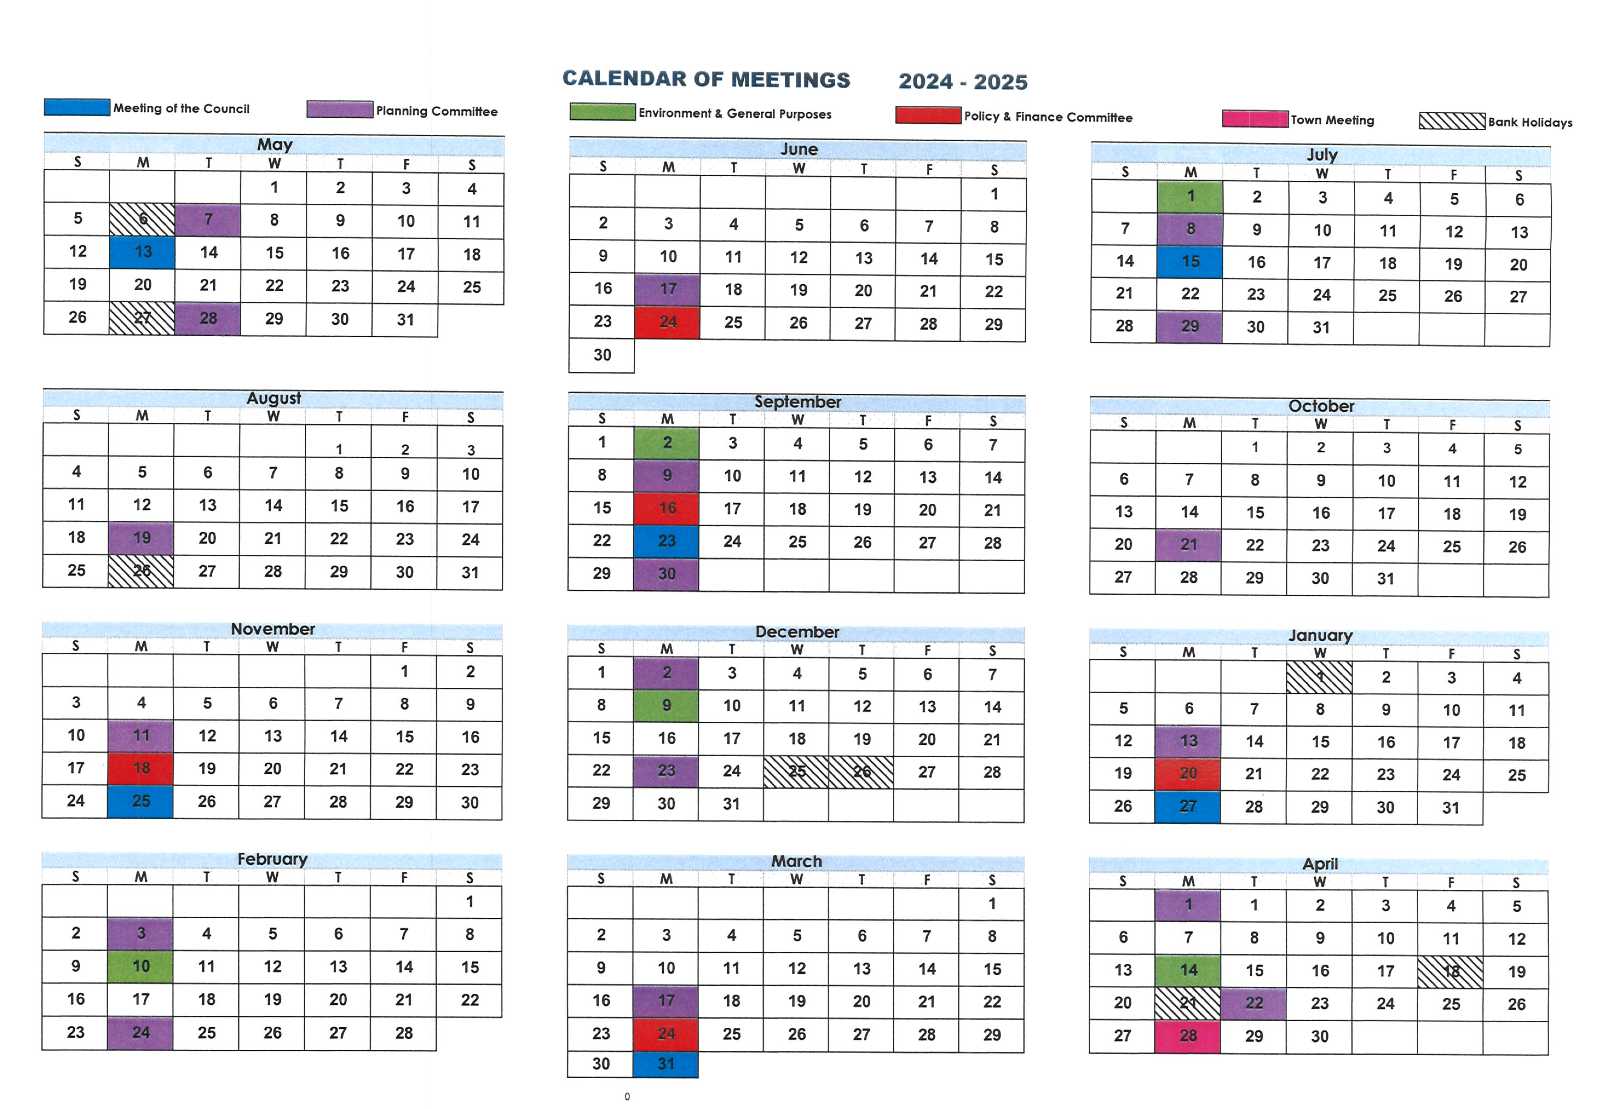 Calendar of Council Meetings for the year 2024-2025